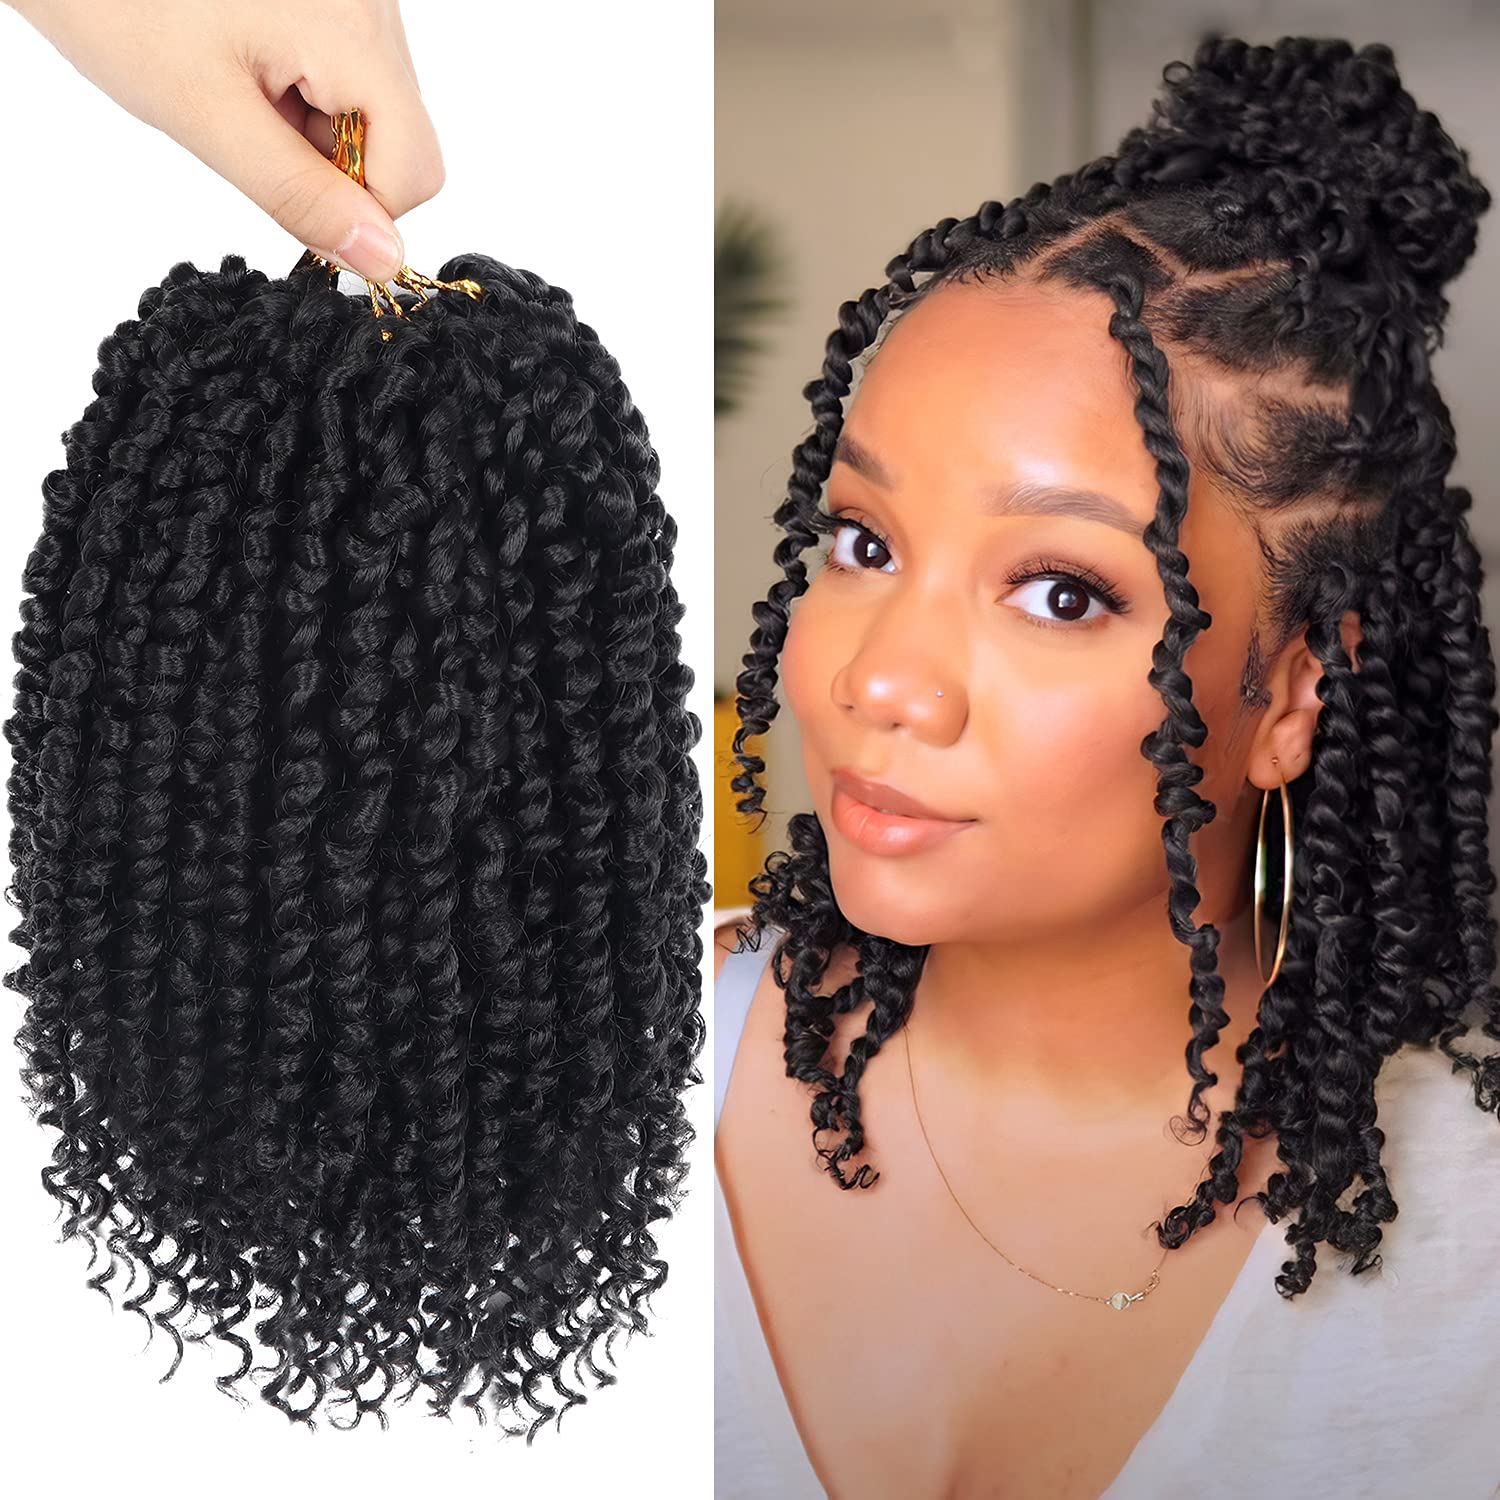 10 Inches Synthetic Crochet Hair Senegalese Twist Hair Crochet for